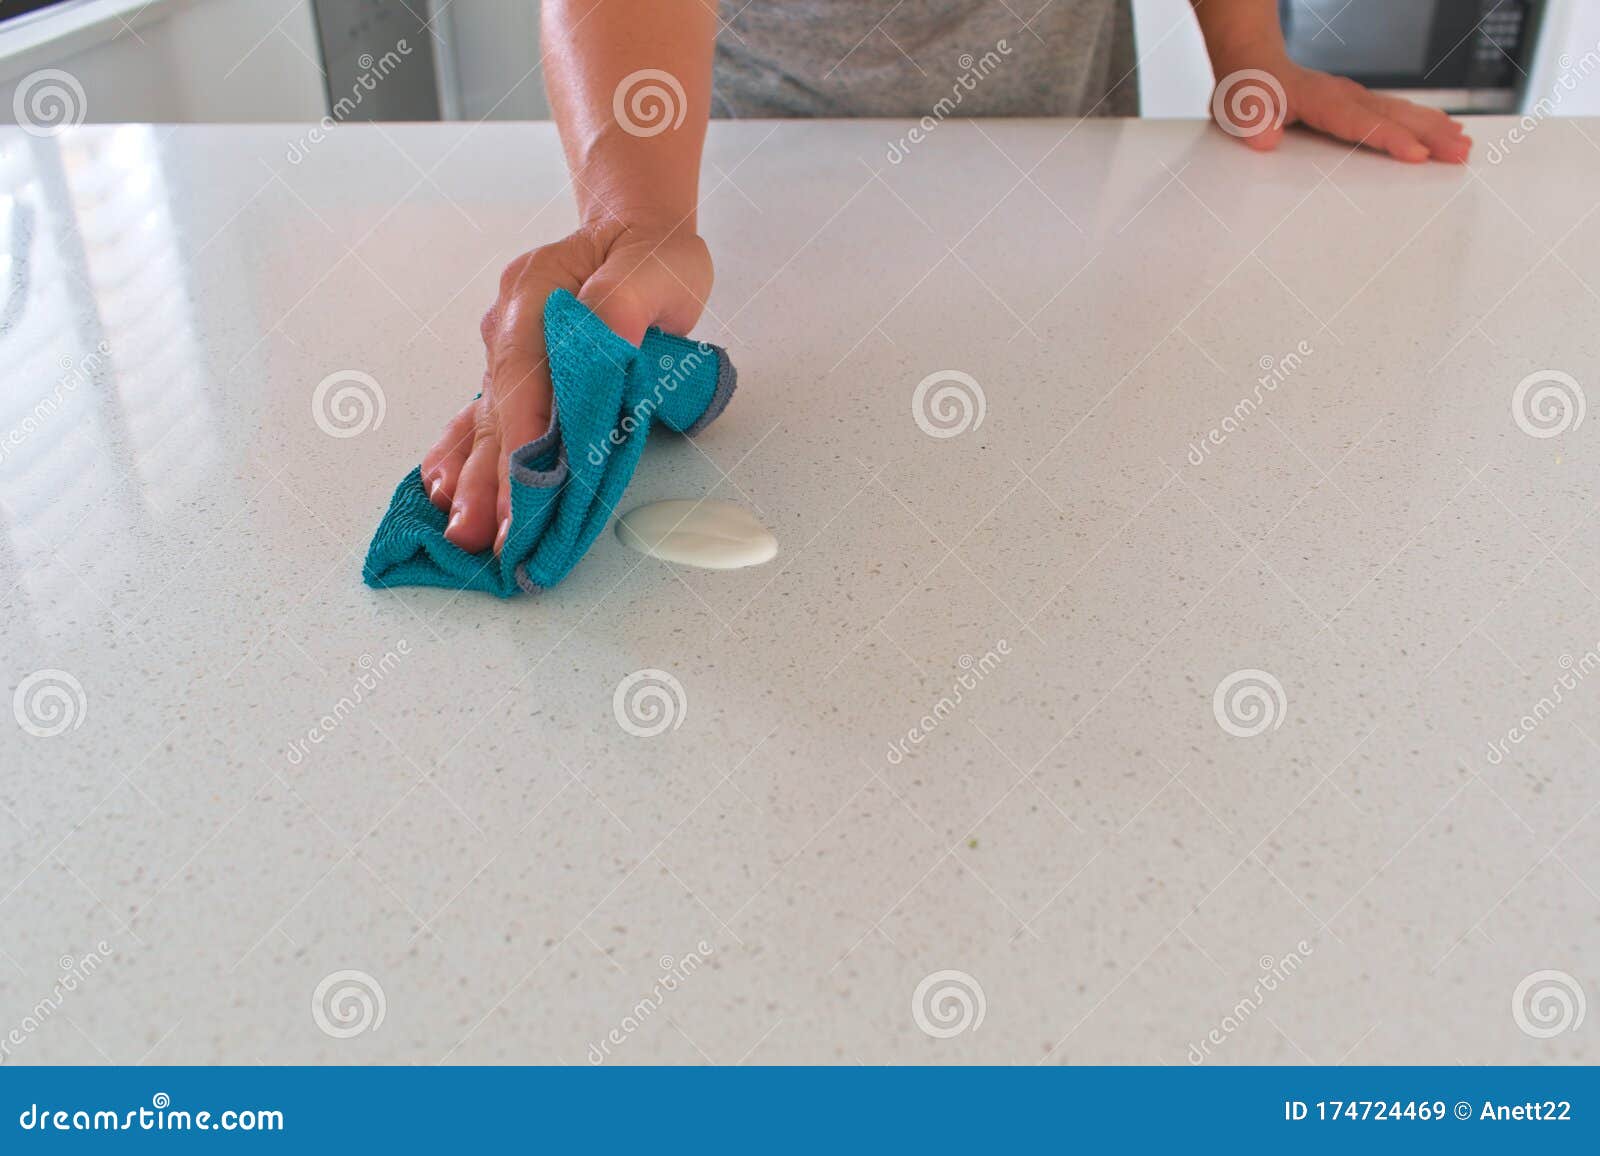 Woman Cleaning Kitchen Countertop Stock Image Image Of